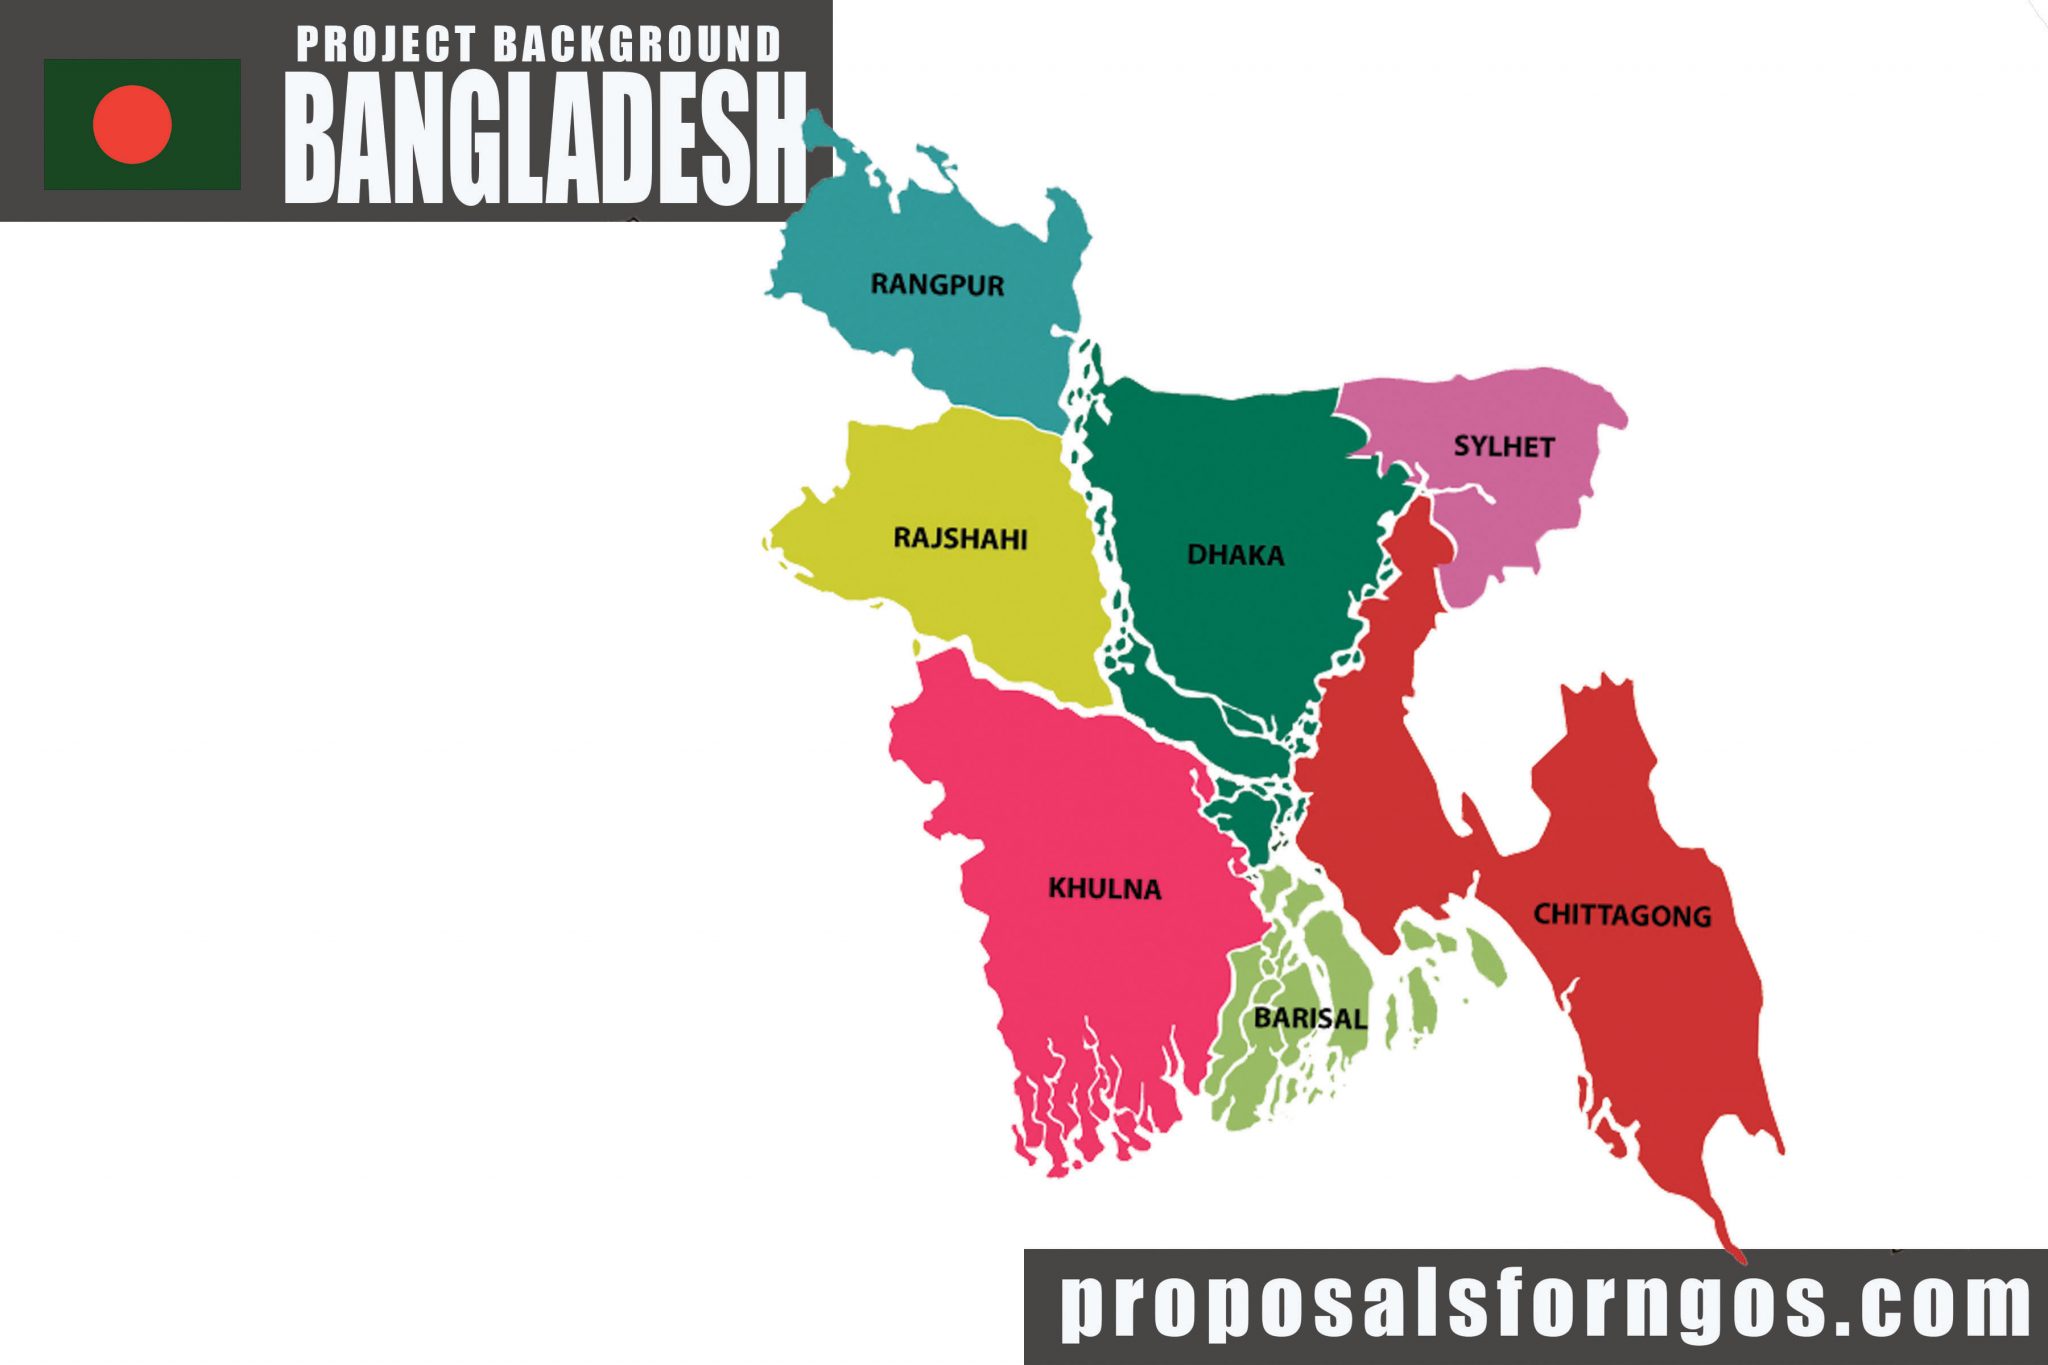 Sample Project Background for BANGLADESH with image of country map and flag